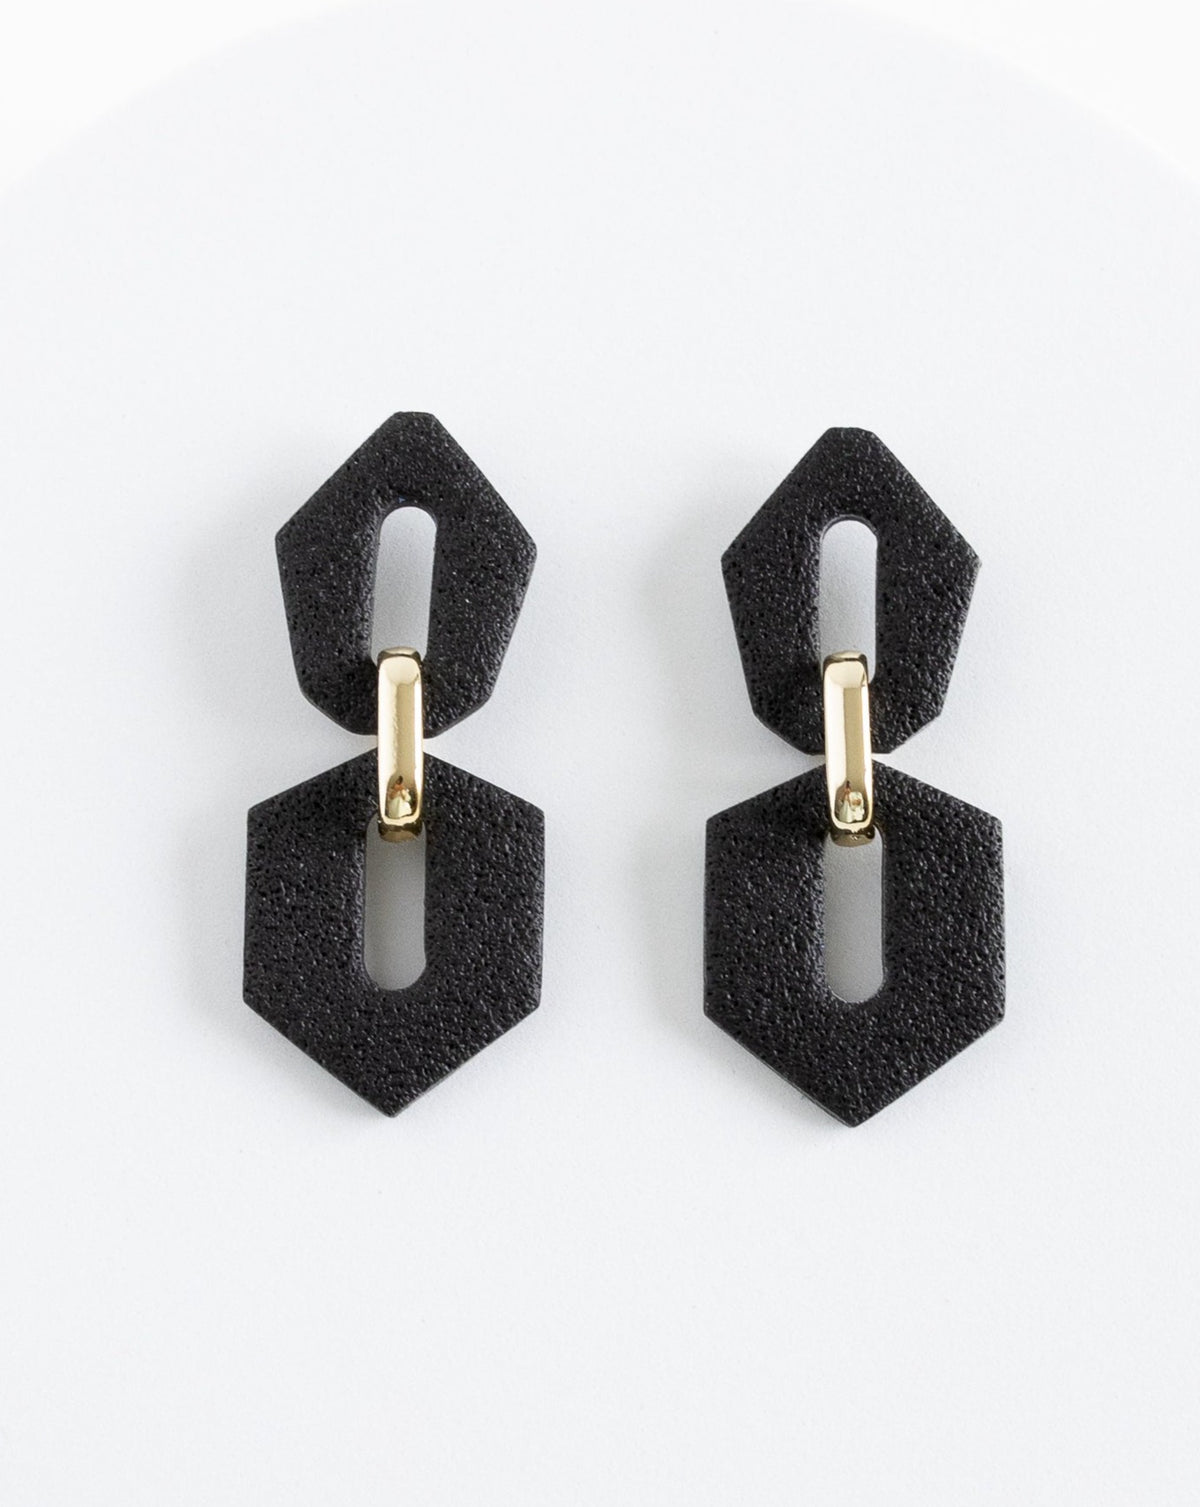 LYHO exclusive design, Shilla earrings in black, front view.